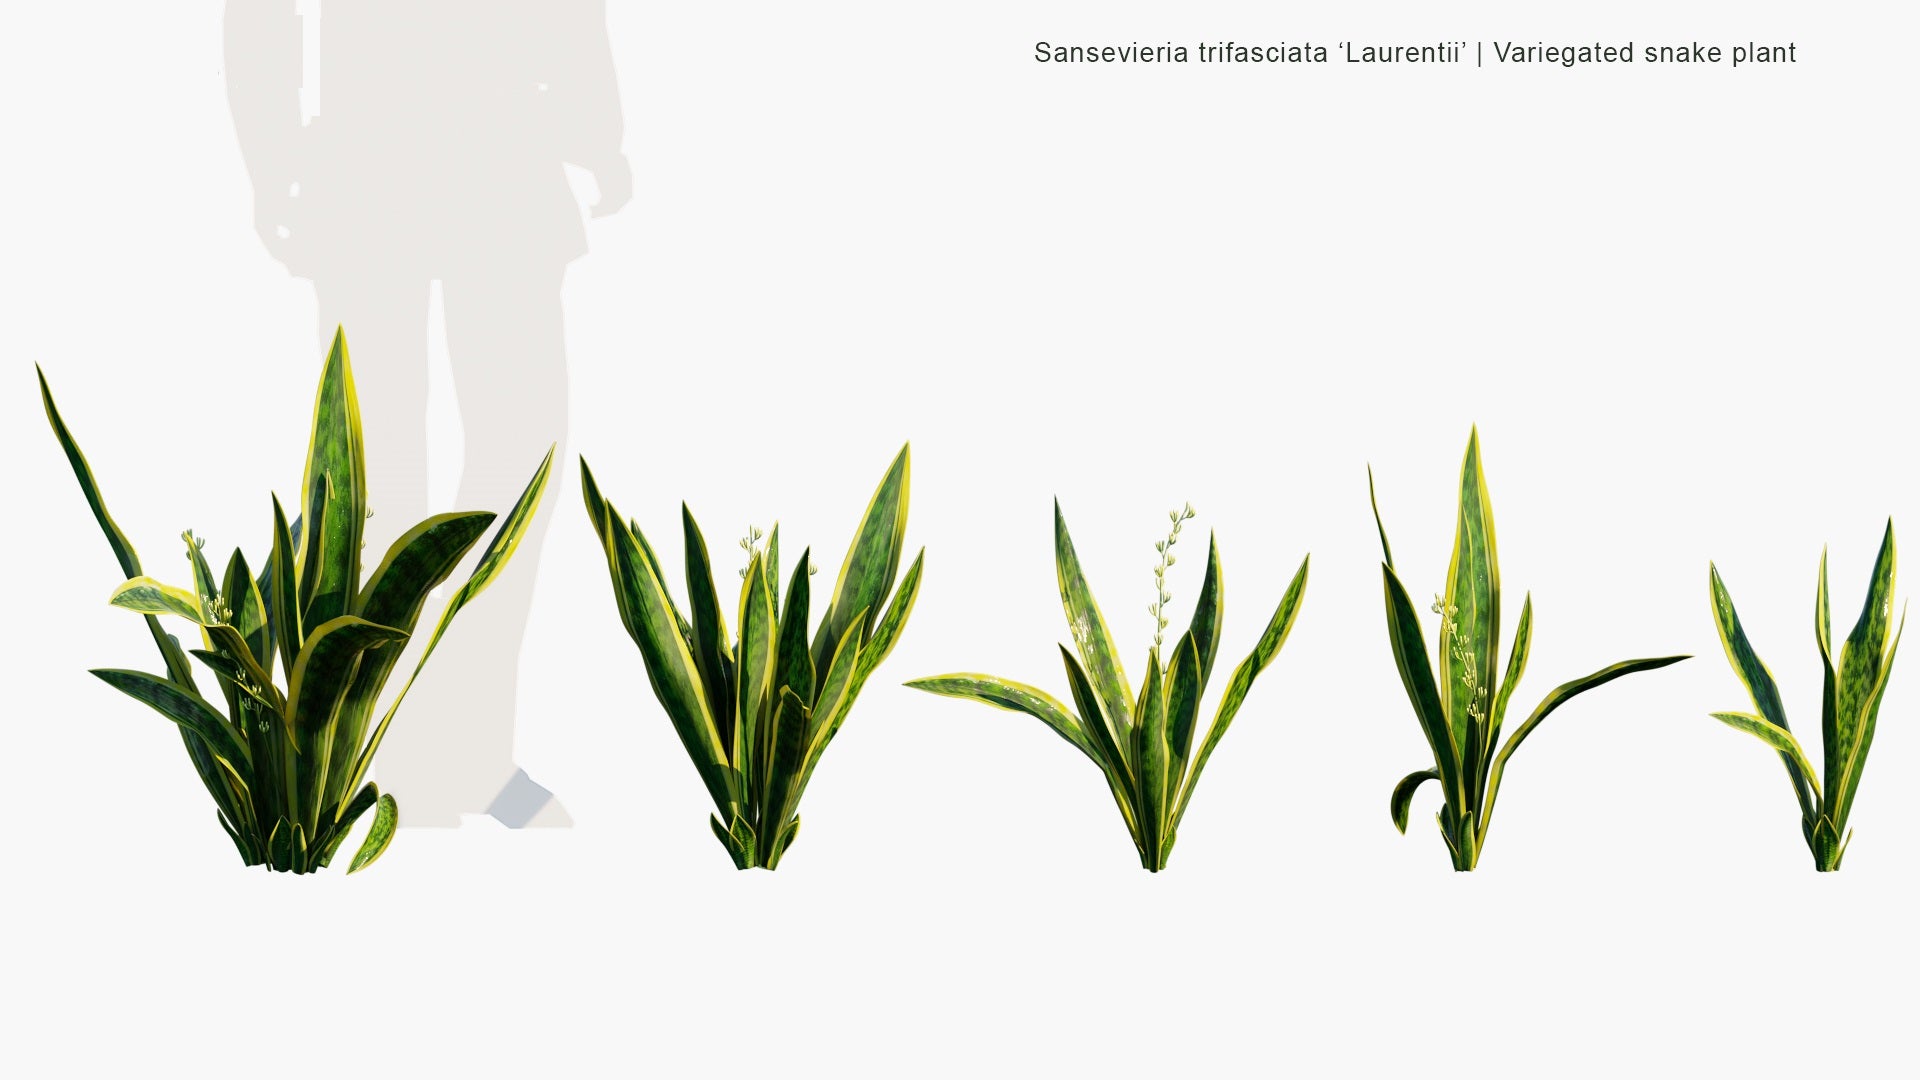 Low Poly Sansevieria Trifasciata 'Laurentii' - Variegated Snake Plant, Saint George's Sword, Mother-in-Law's Tongue, Viper's Bowstring Hemp (3D Model)